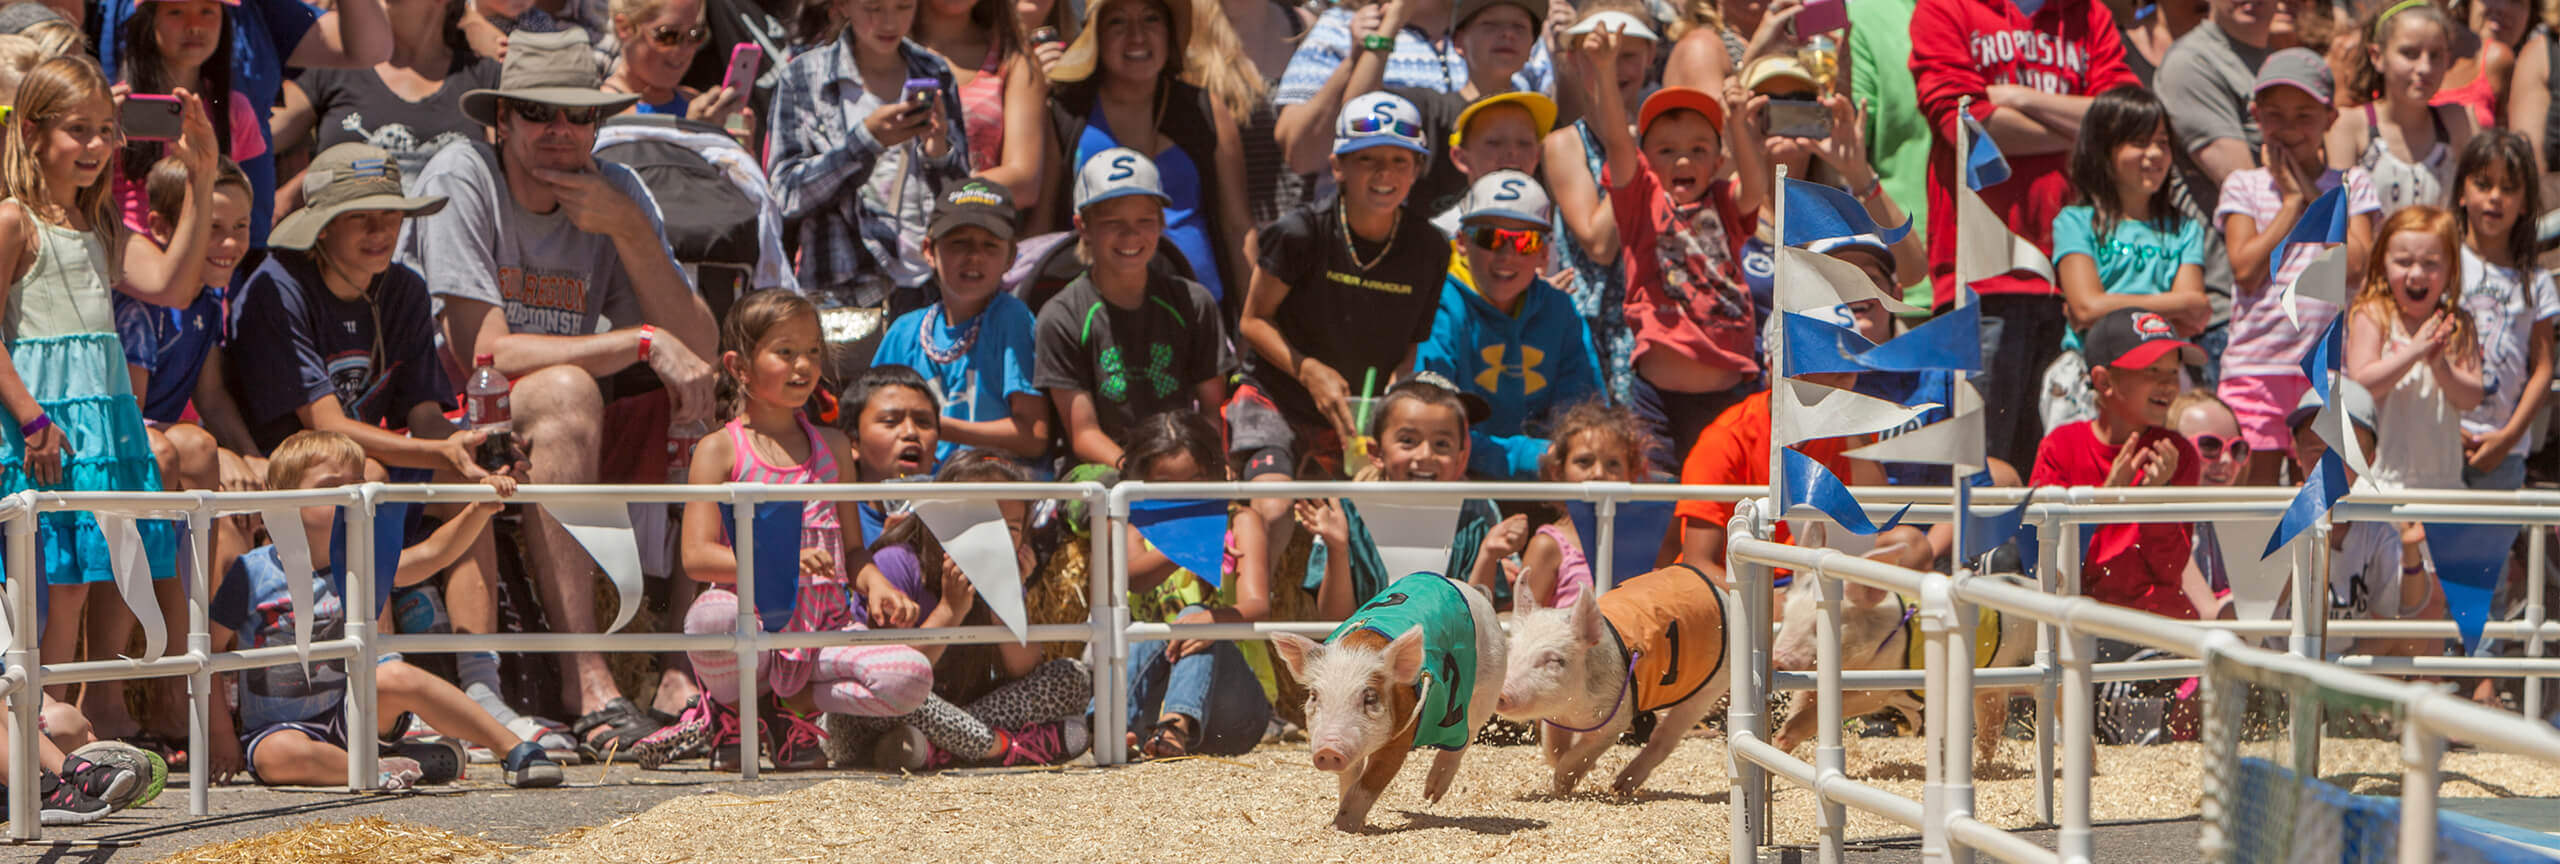 Two piglets wearing blankets running around a course at the pig races.